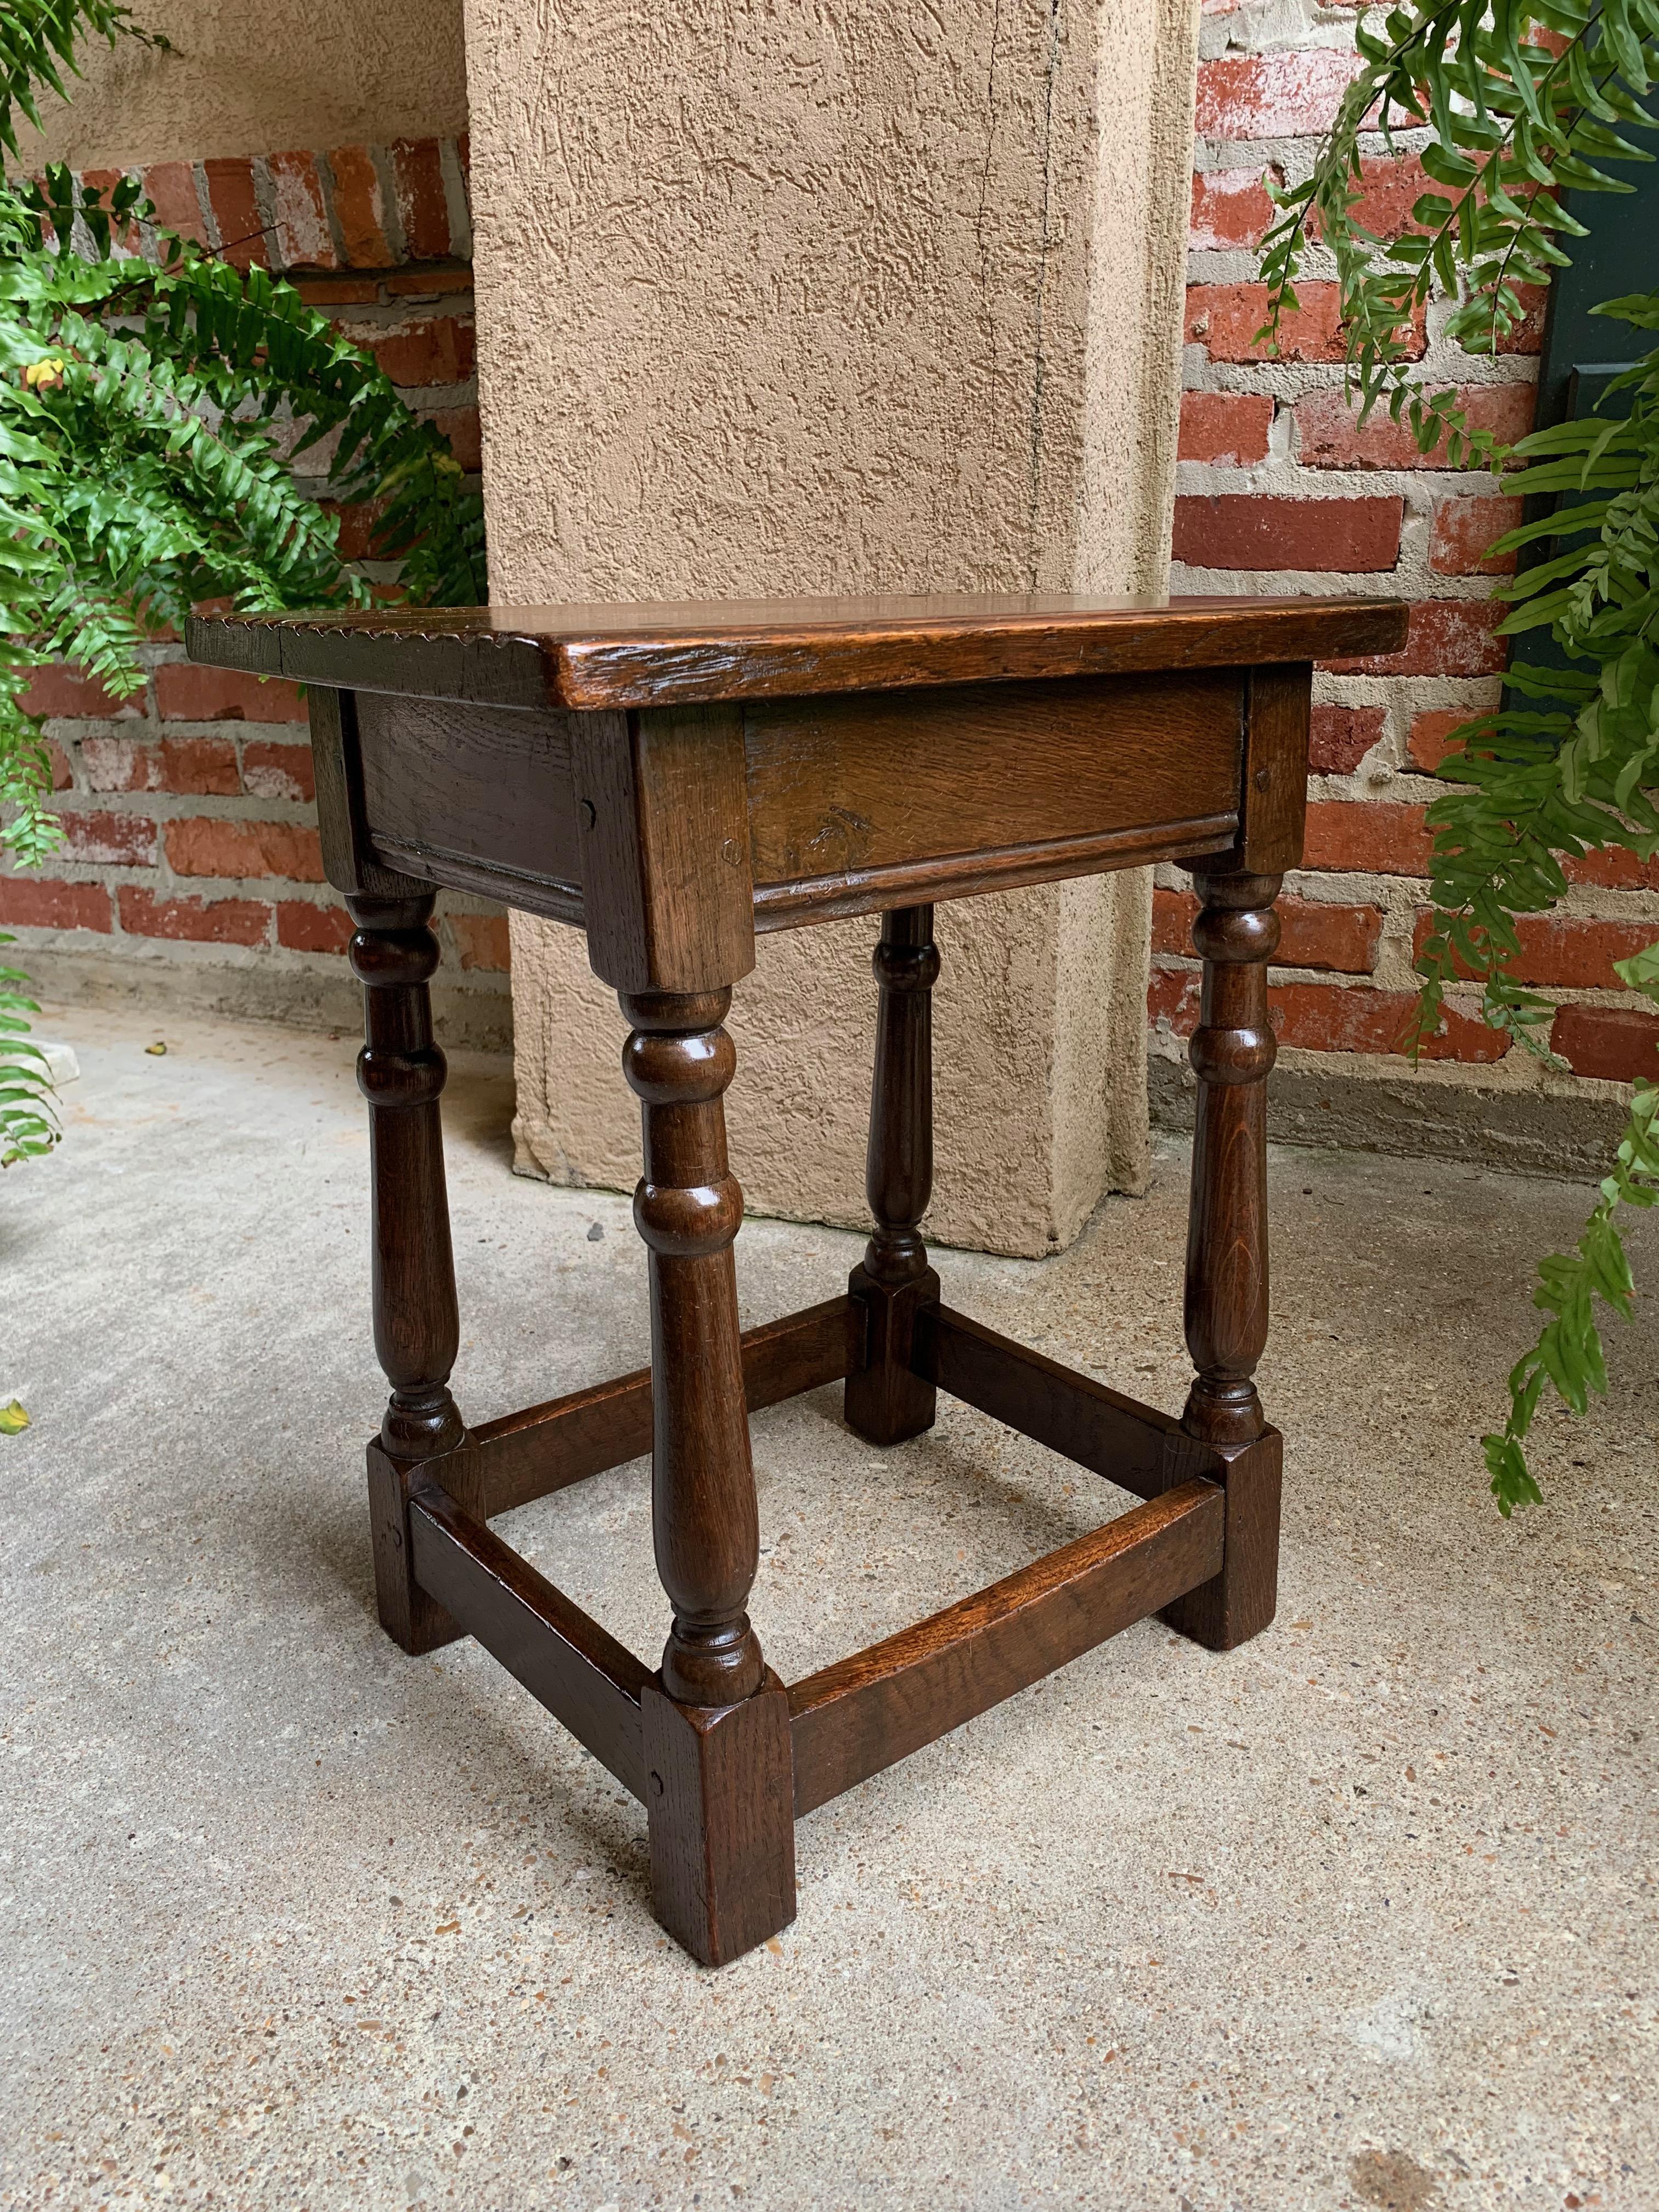 Jacobean Antique English Carved Tiger Oak Joint Stool Bench Table Splayed Leg c1900